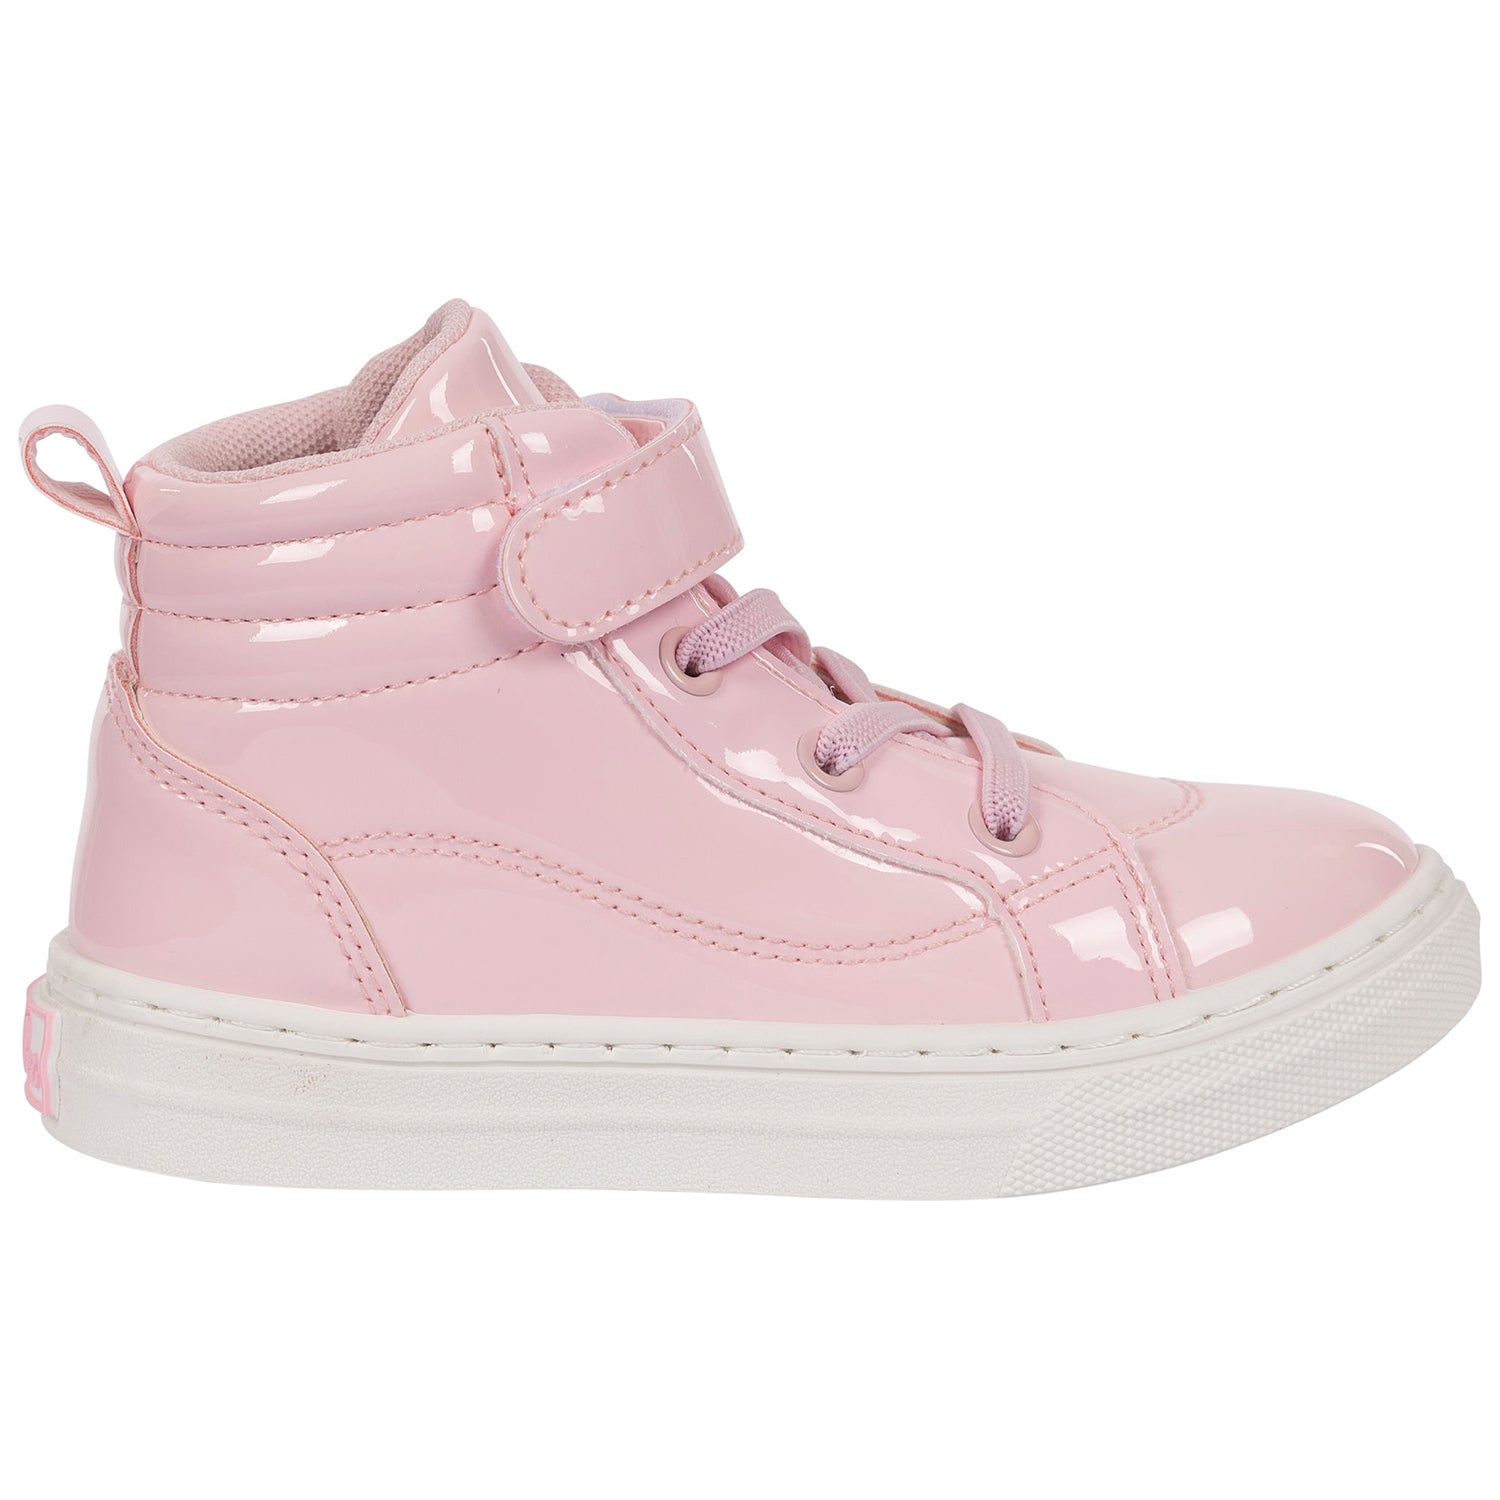 Pale Pink High Top Trainer